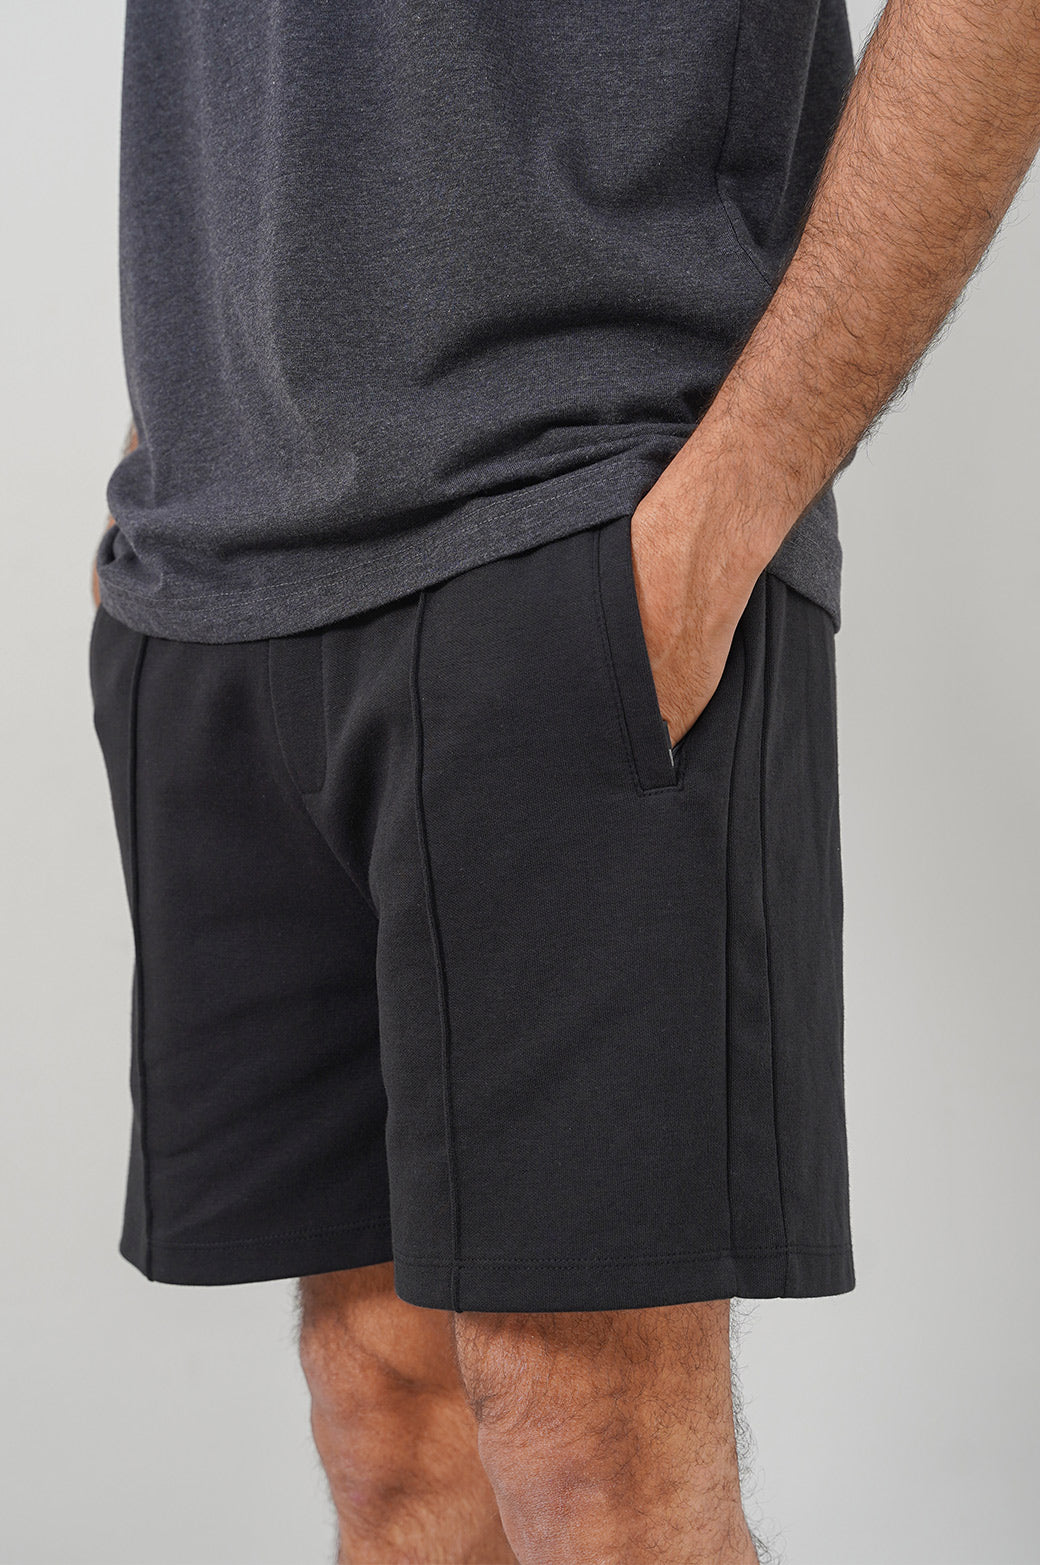 ALL BALCK SHORTS WITH SIDE PANEL